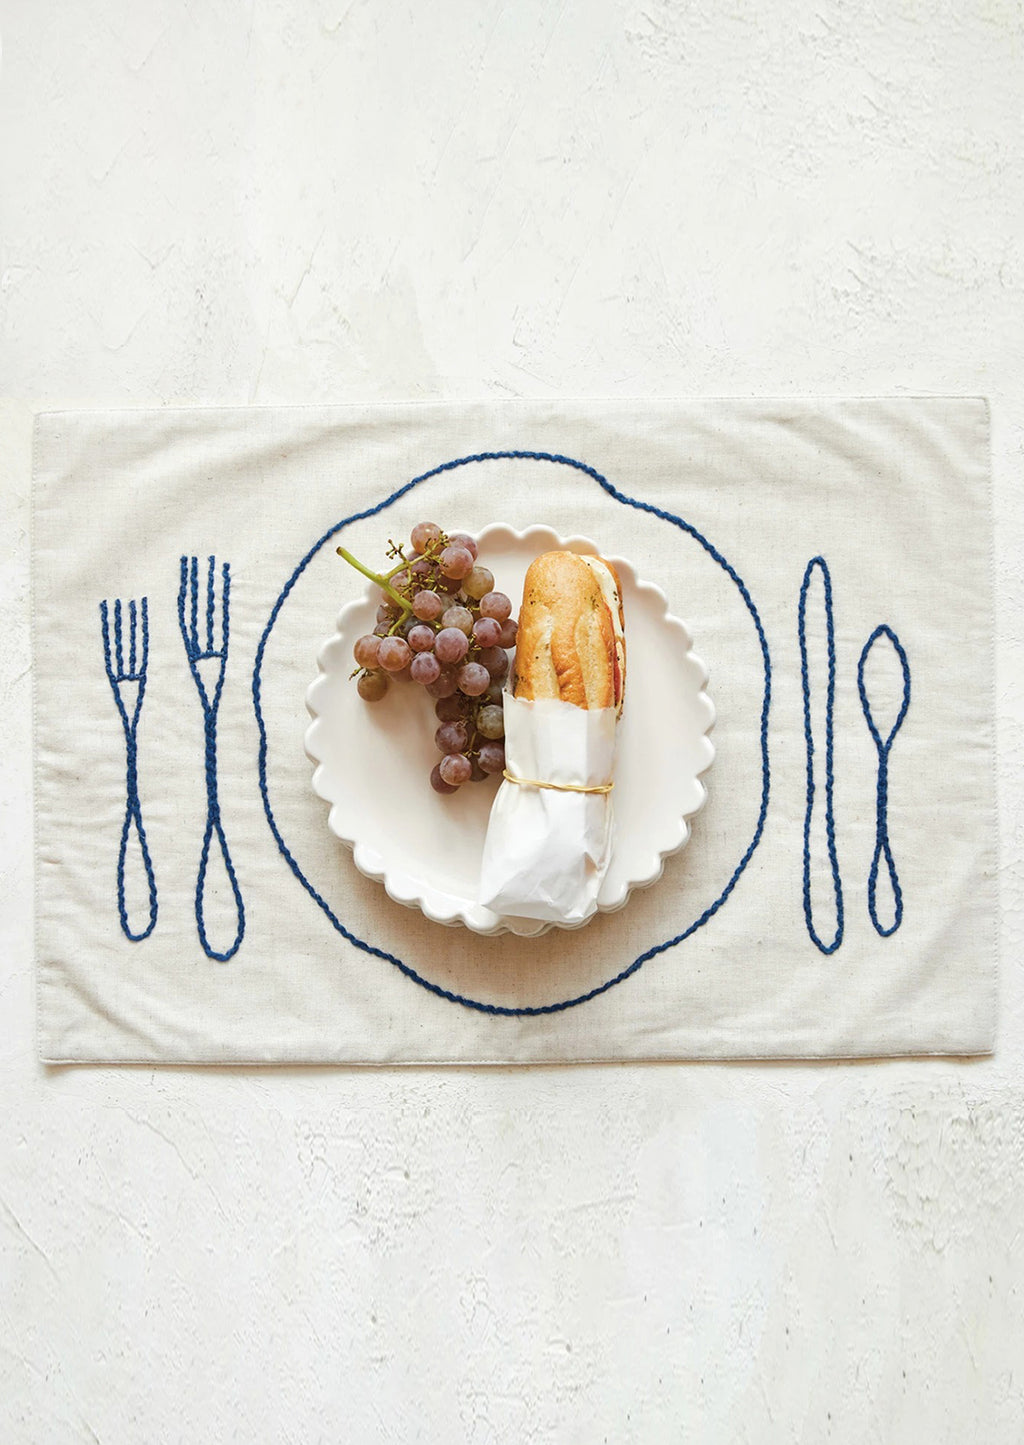 1: An off-white linen-cotton placemat with navy blue plate and silverware embroidery.